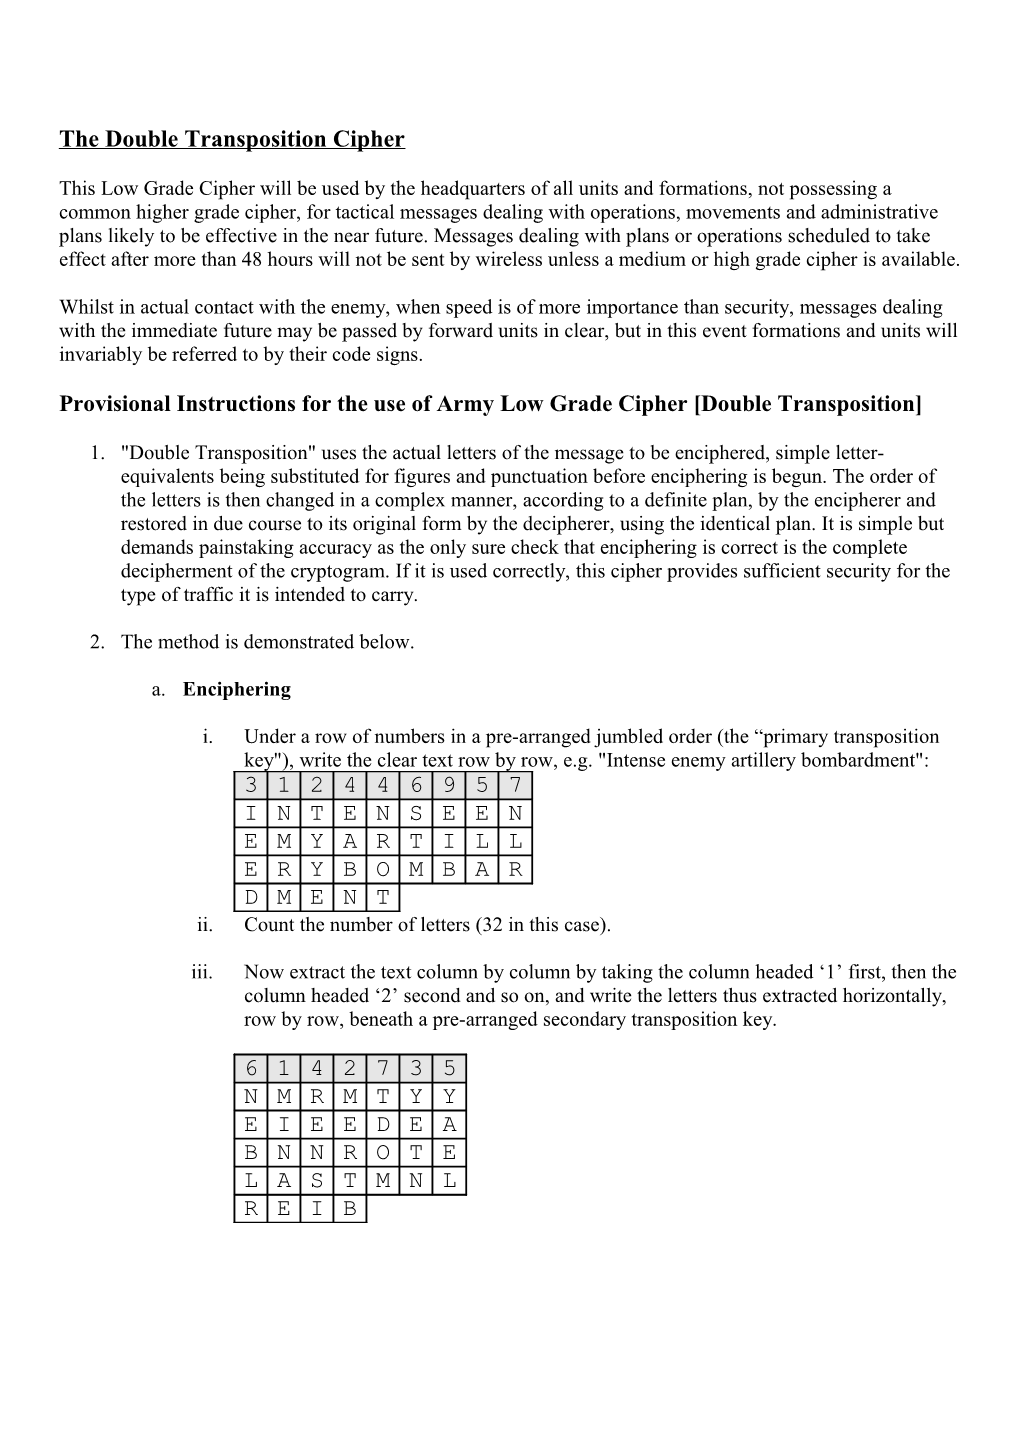 The Double Transposition Cipher